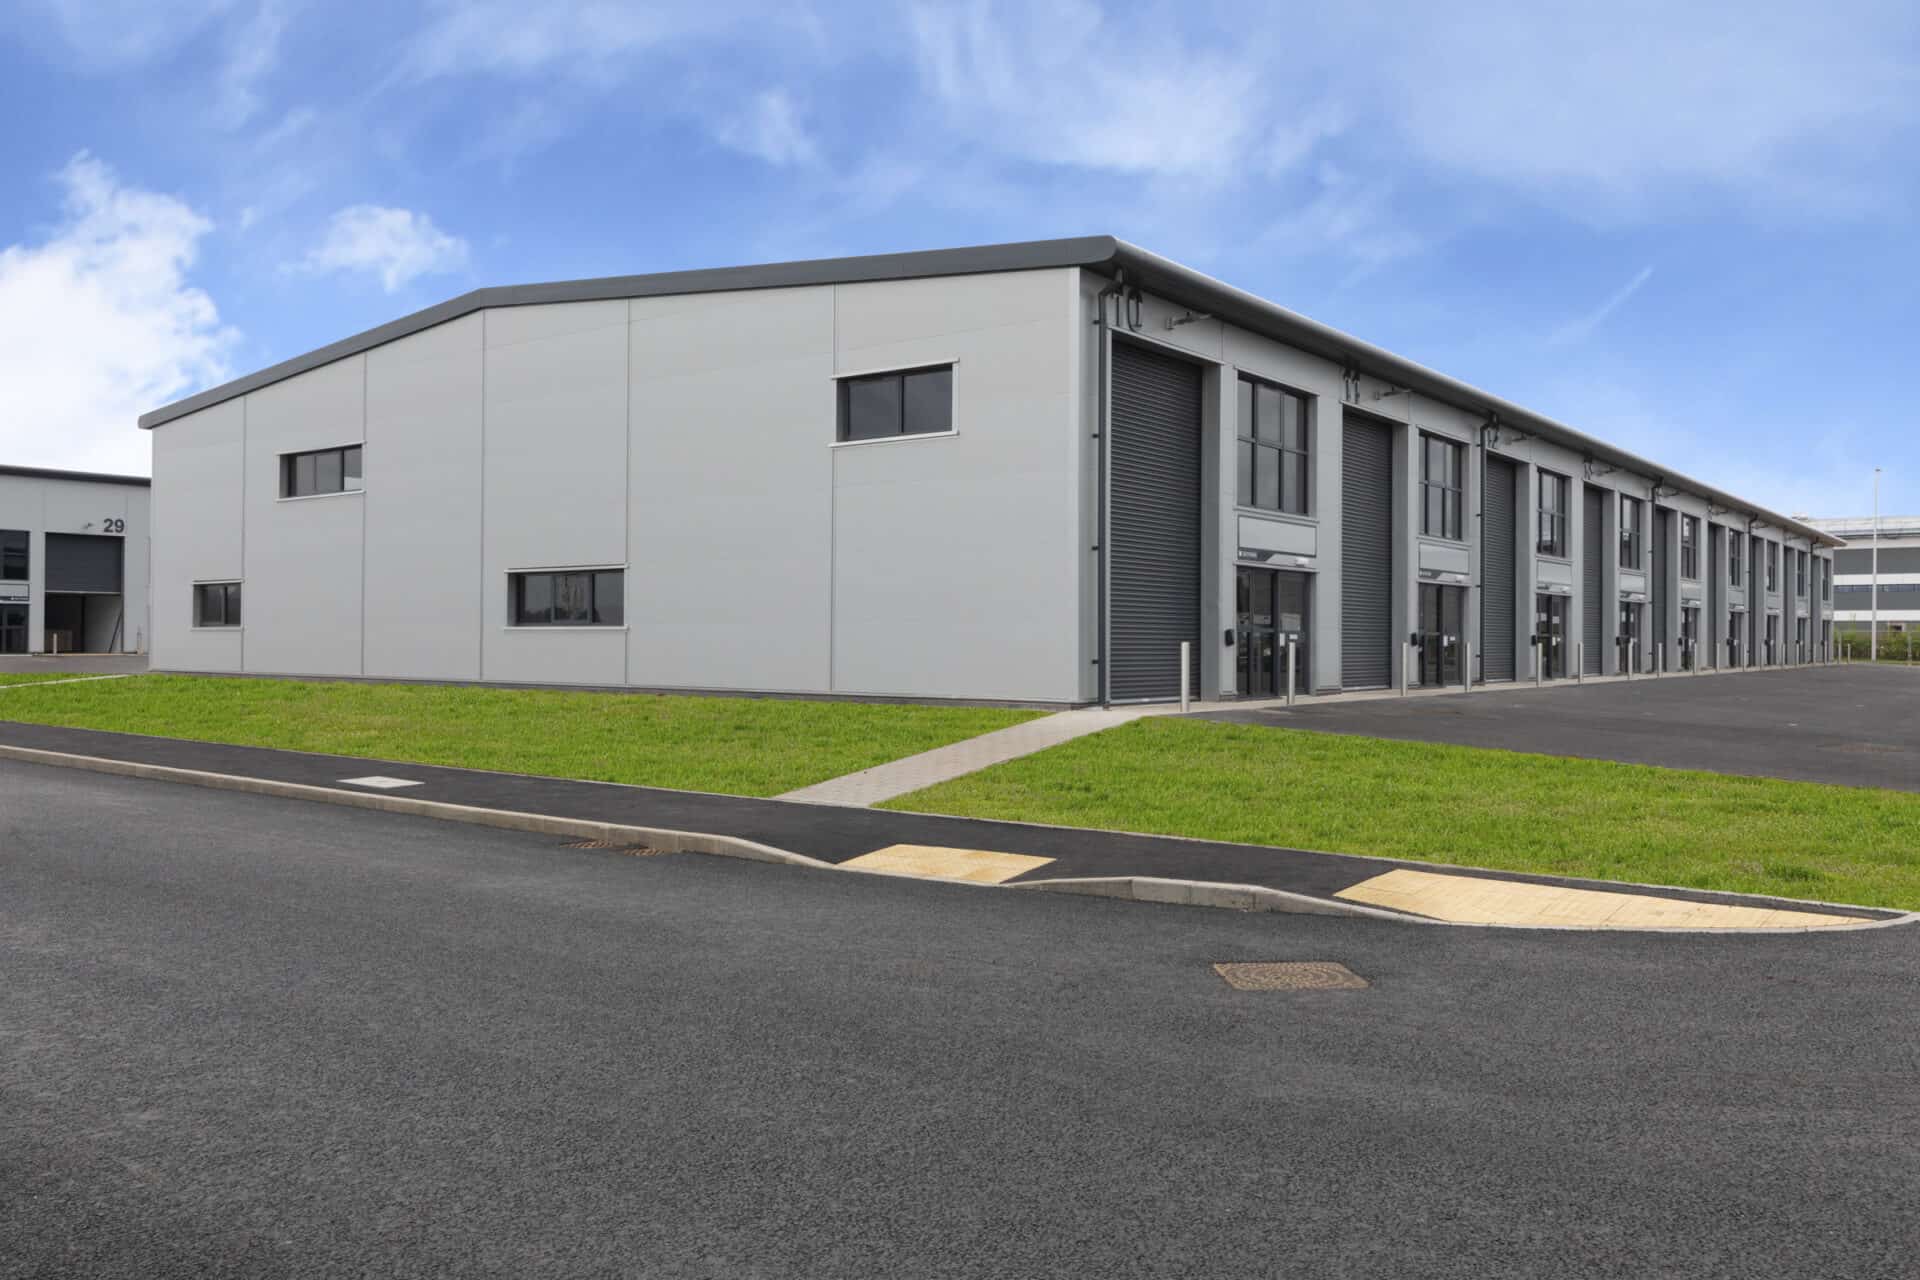 Sunny day view of the completed light industrial units at Skypark. This picturesque scene showcases the successful development of versatile workspaces in a beautiful setting